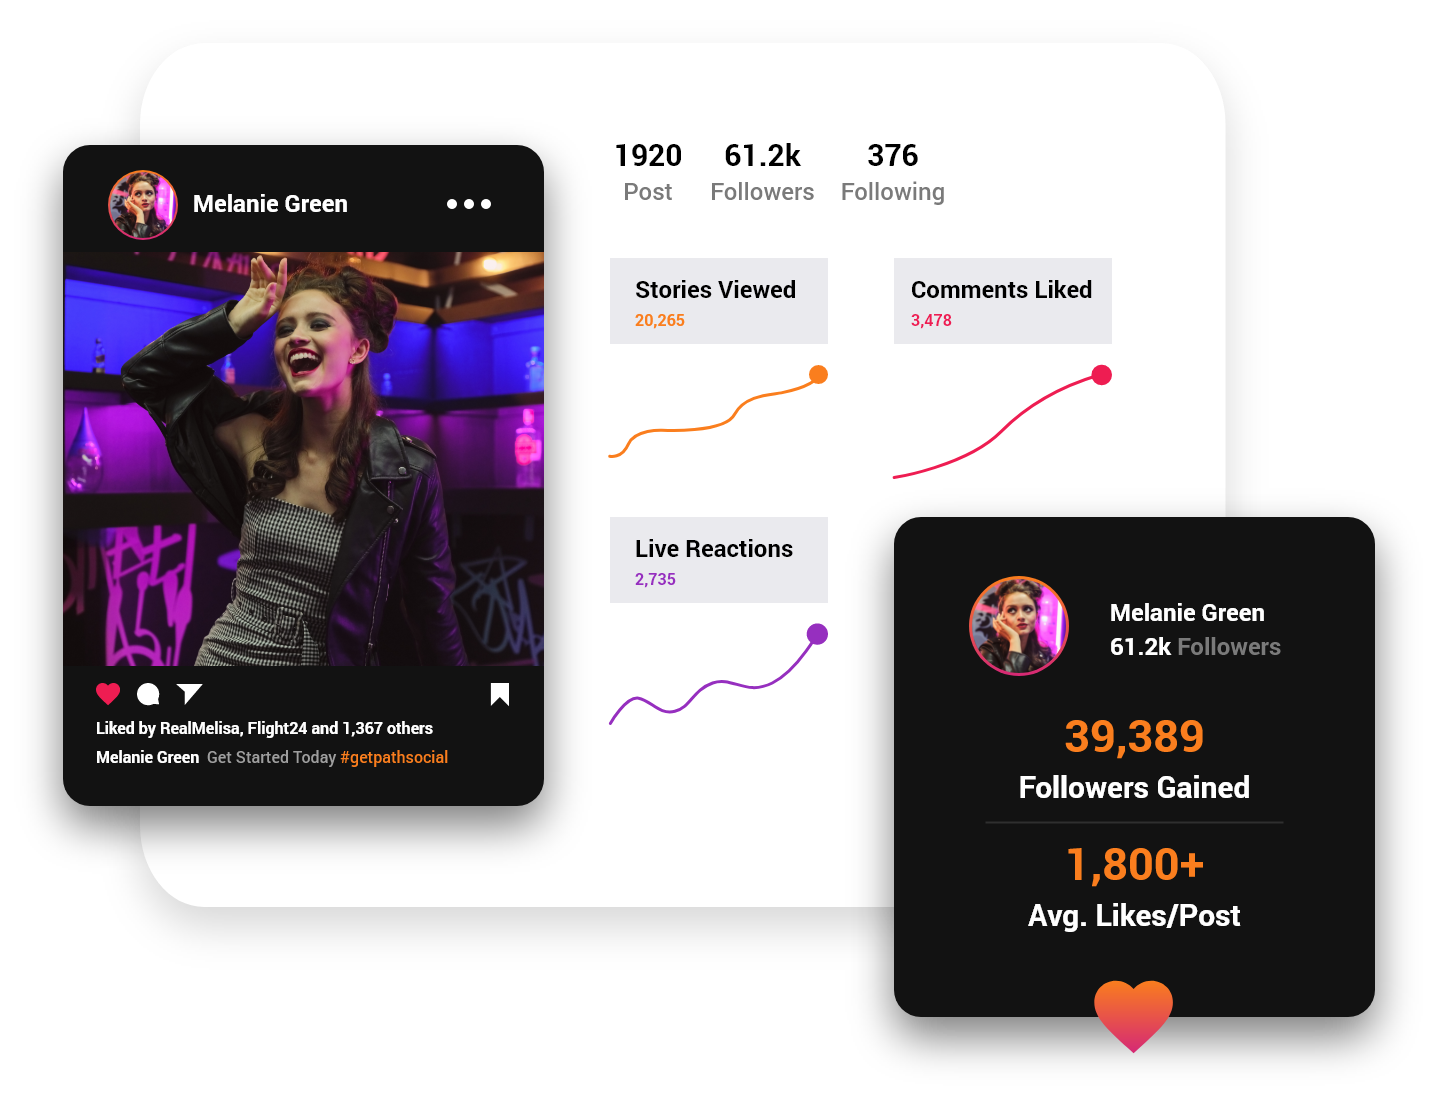 A graphical interface showcasing the social media analytics of a user named melanie green, including her follower count, post engagement, and trends in her social media performance.